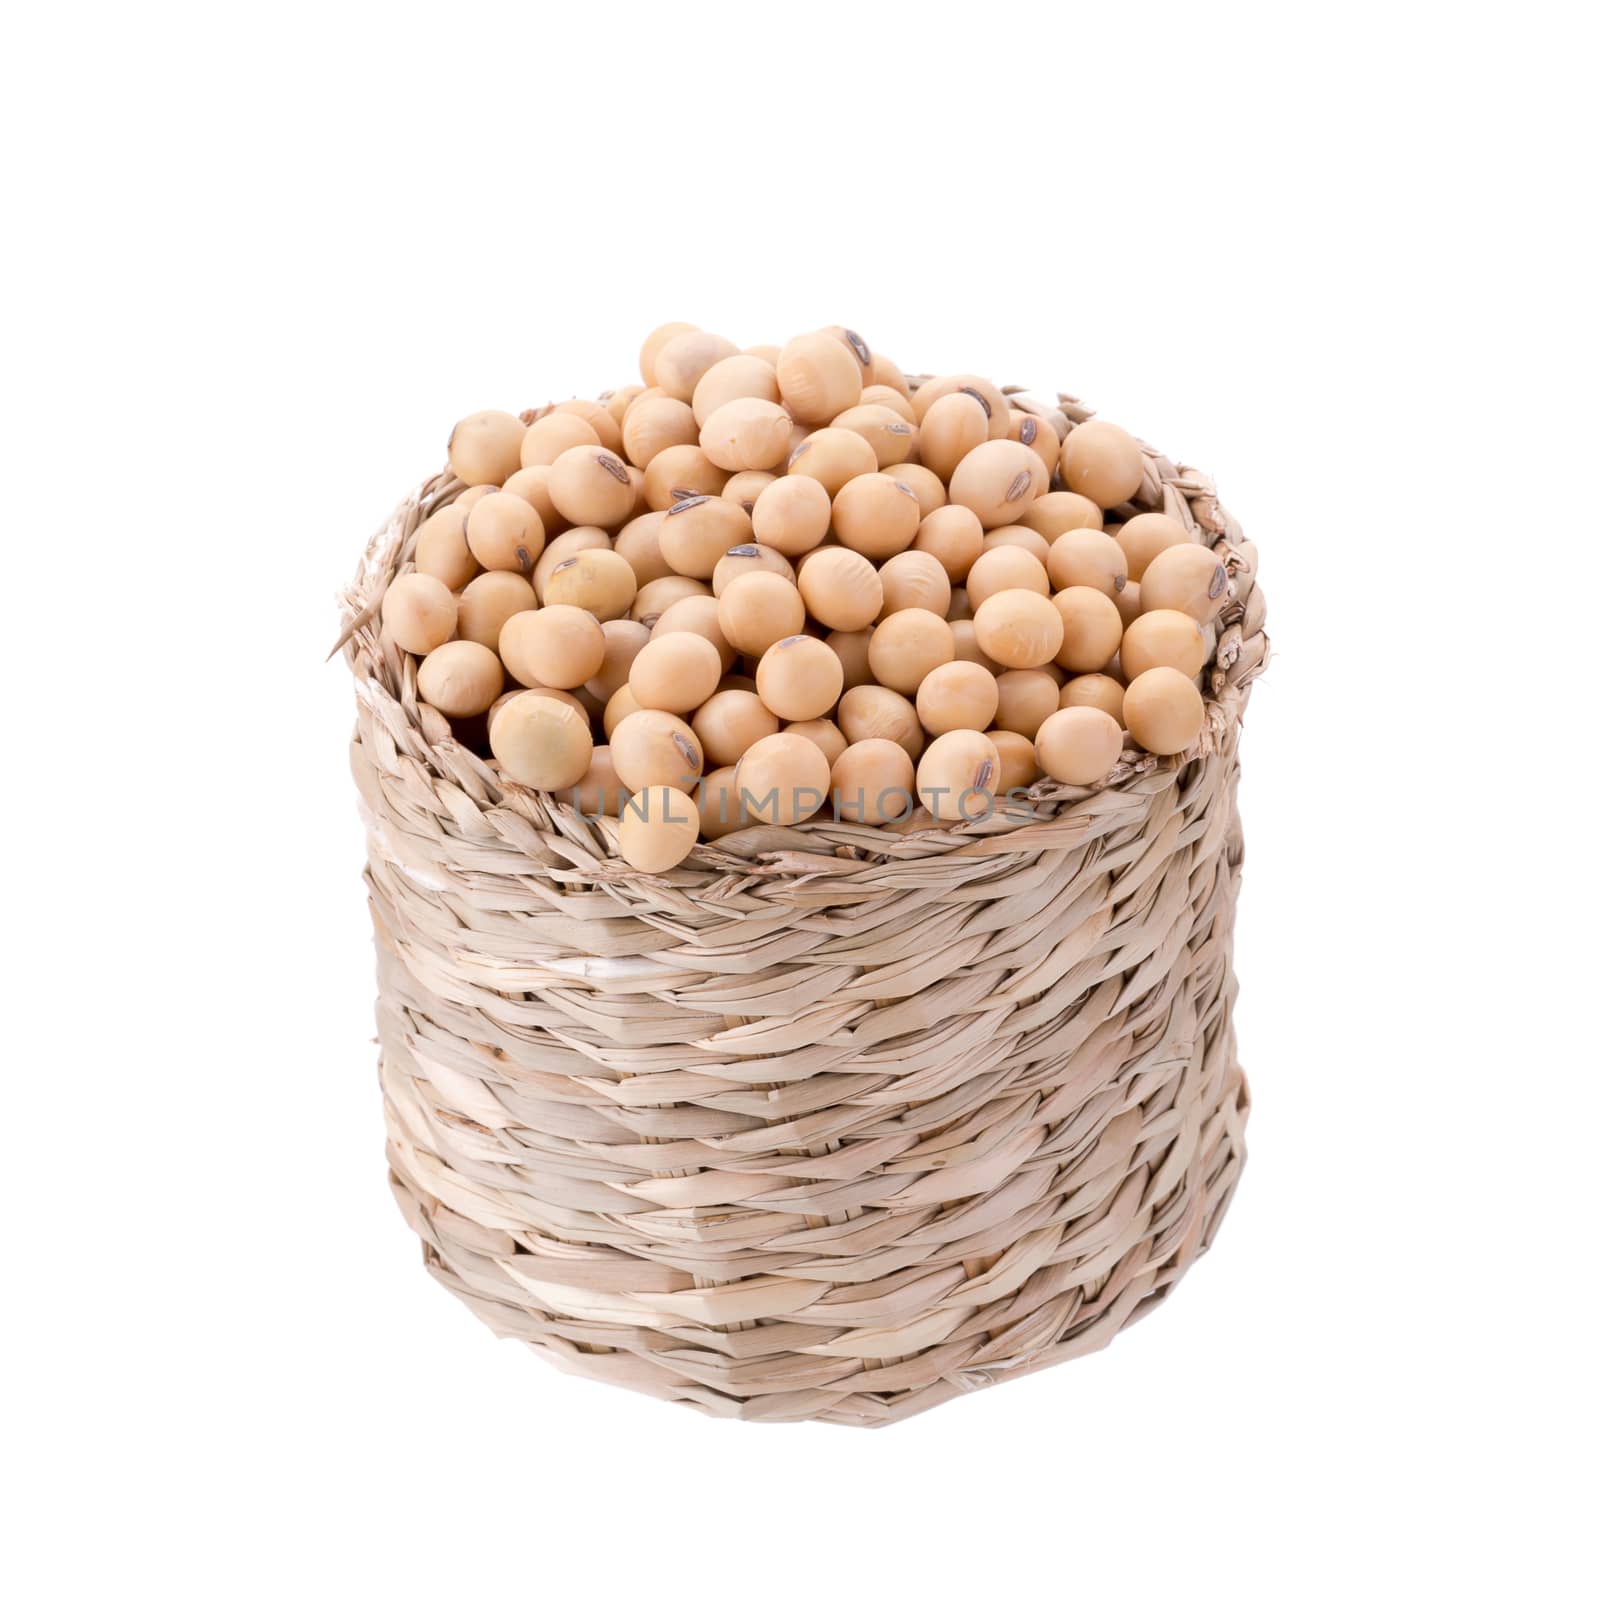 soybeans in basket isolated on white background by kaiskynet